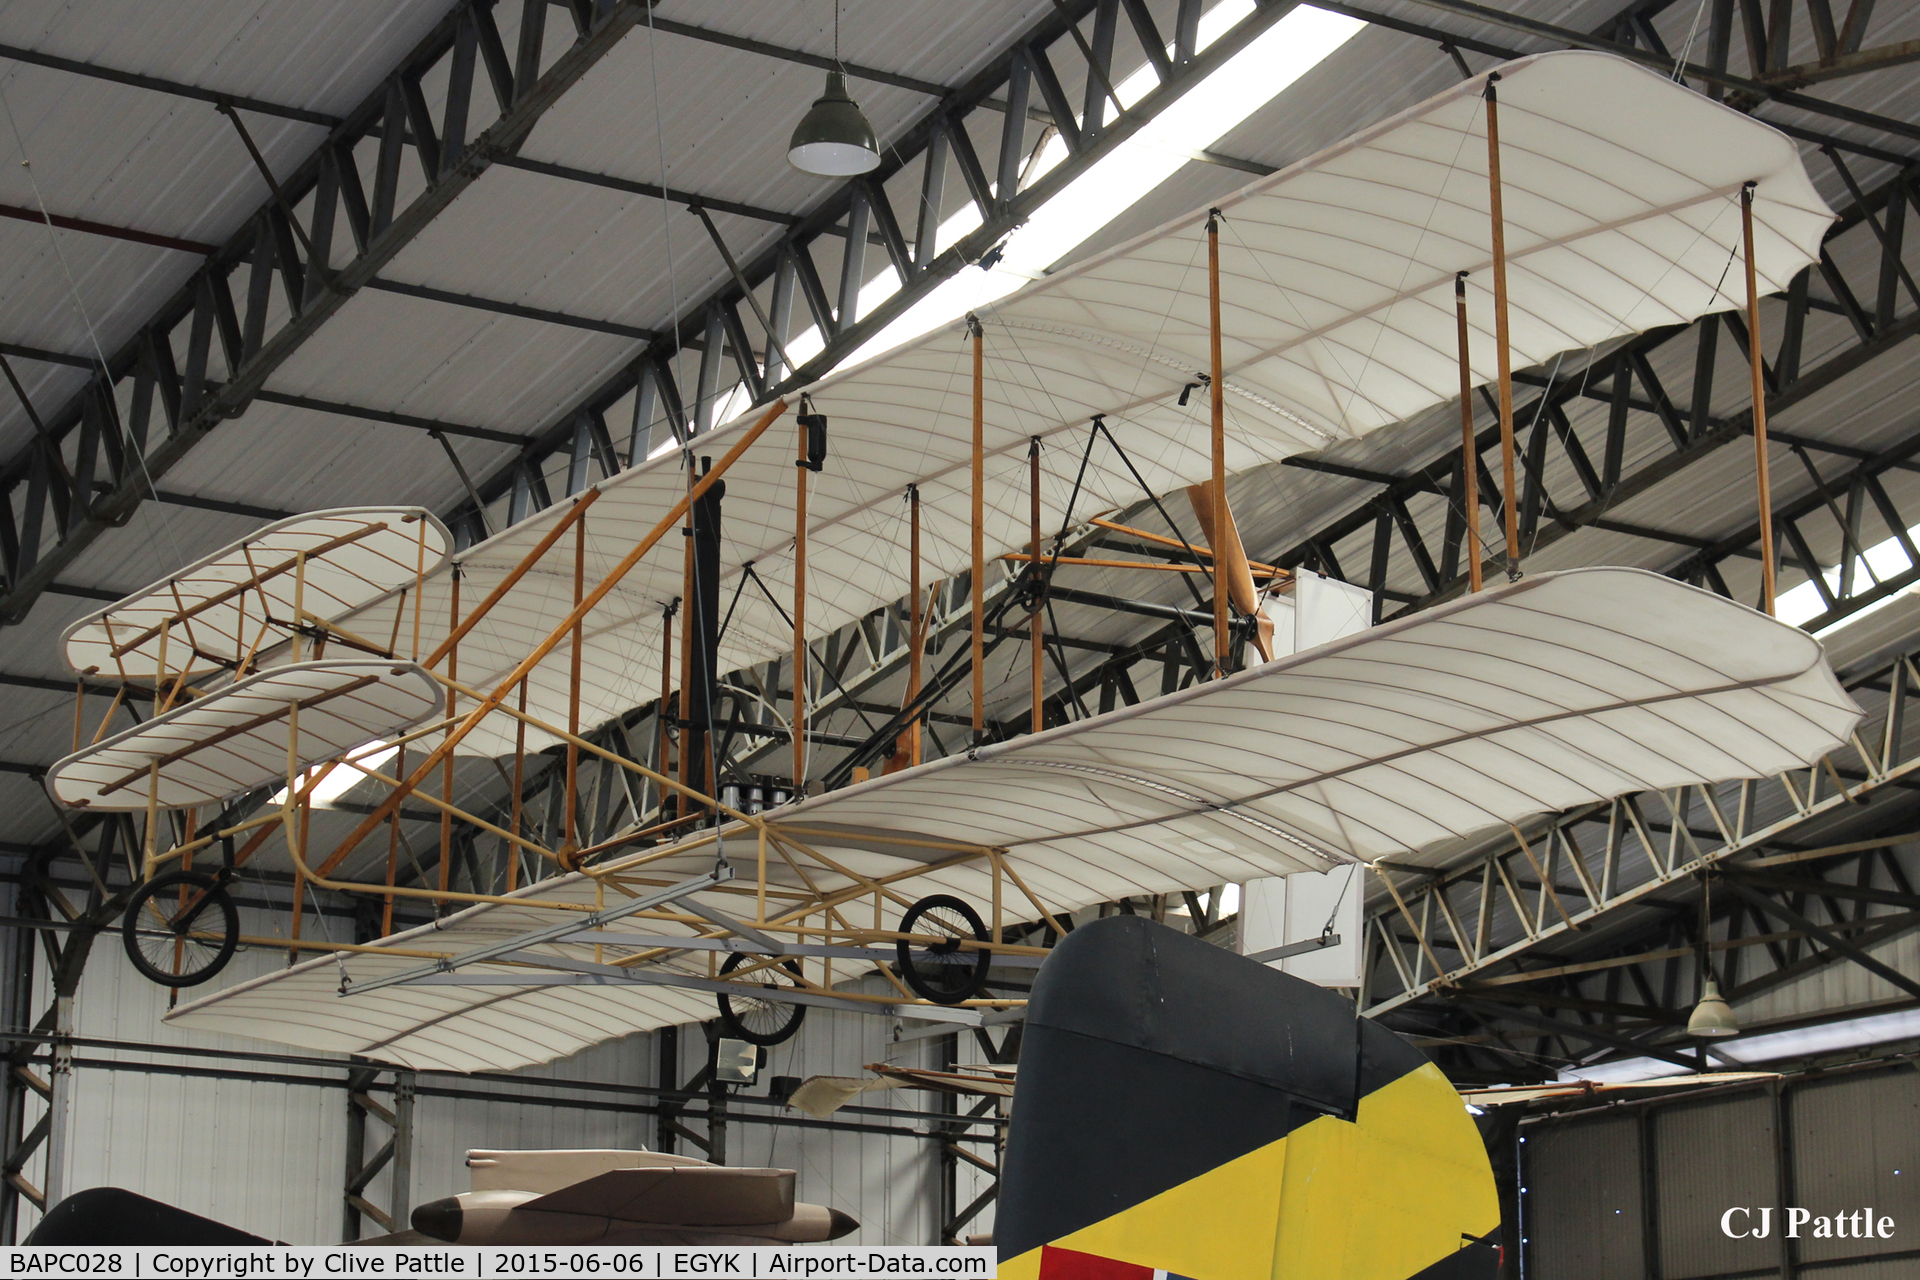 BAPC028, 1965 Wright Flyer Replica C/N BAPC.028, On display at the Yorkshire Air Museum EGYK